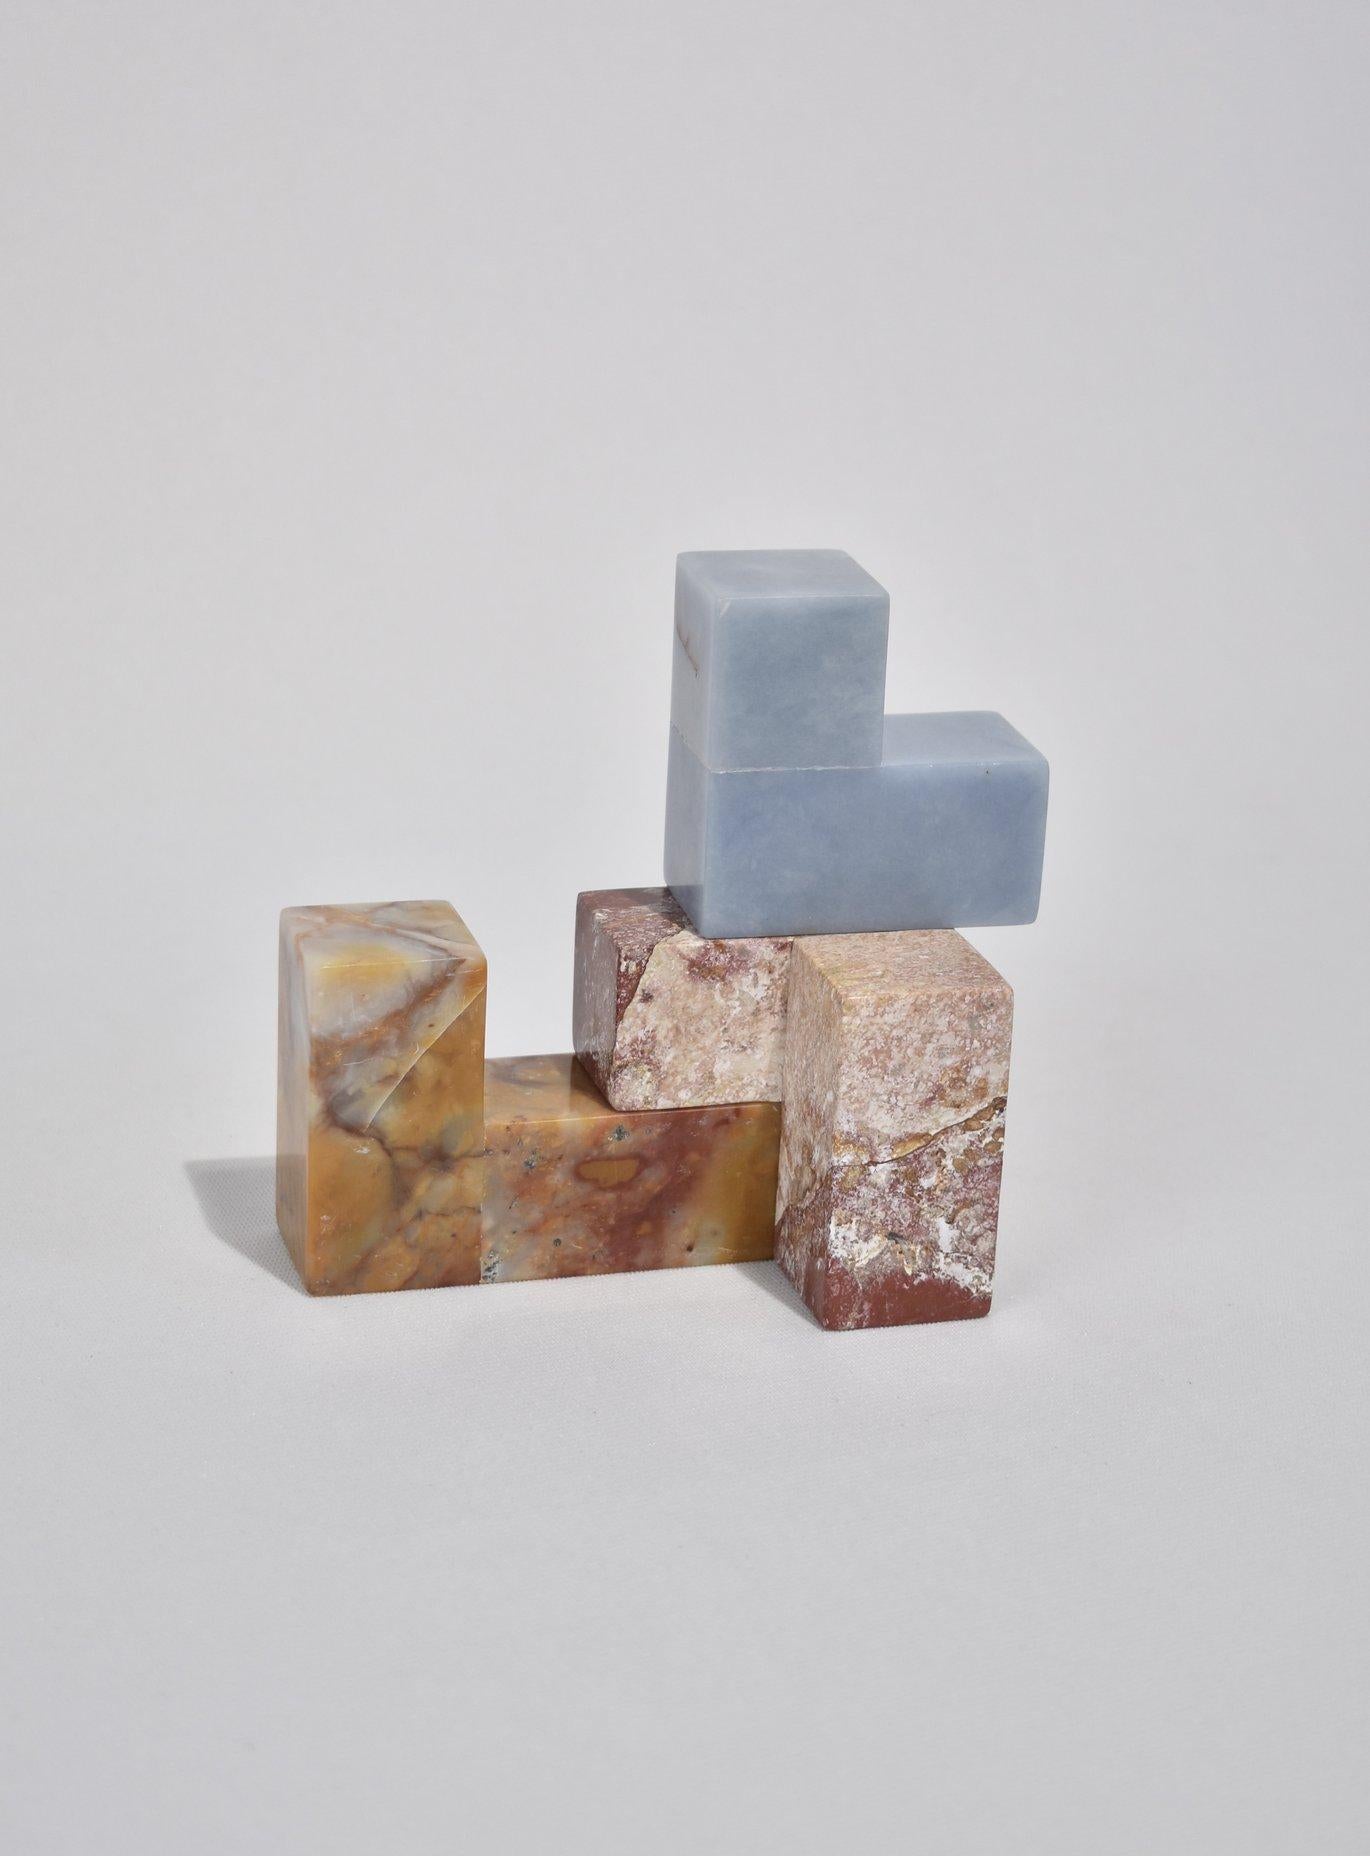 Contemporary Hand-Carved Soma Cube Puzzle Sculpture in Mix Stones